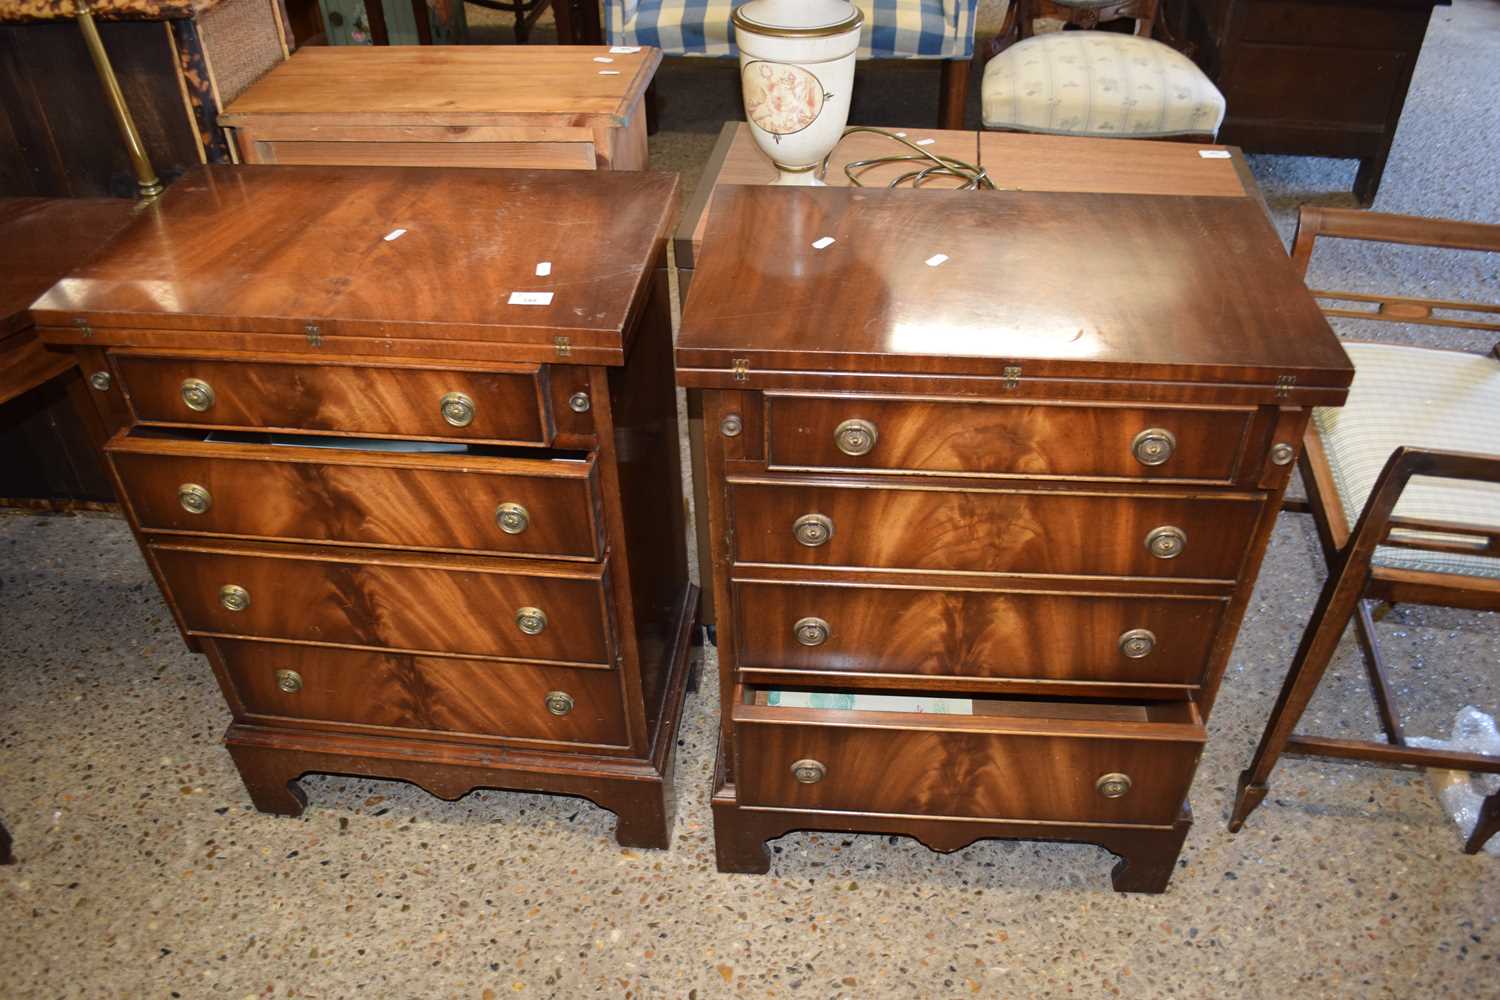 PAIR OF SMALL REPRODUCTION MAHOGANY VENEERED BACHELOR STYLE CHESTS WITH FOLD-OVER TOPS OVER FOUR